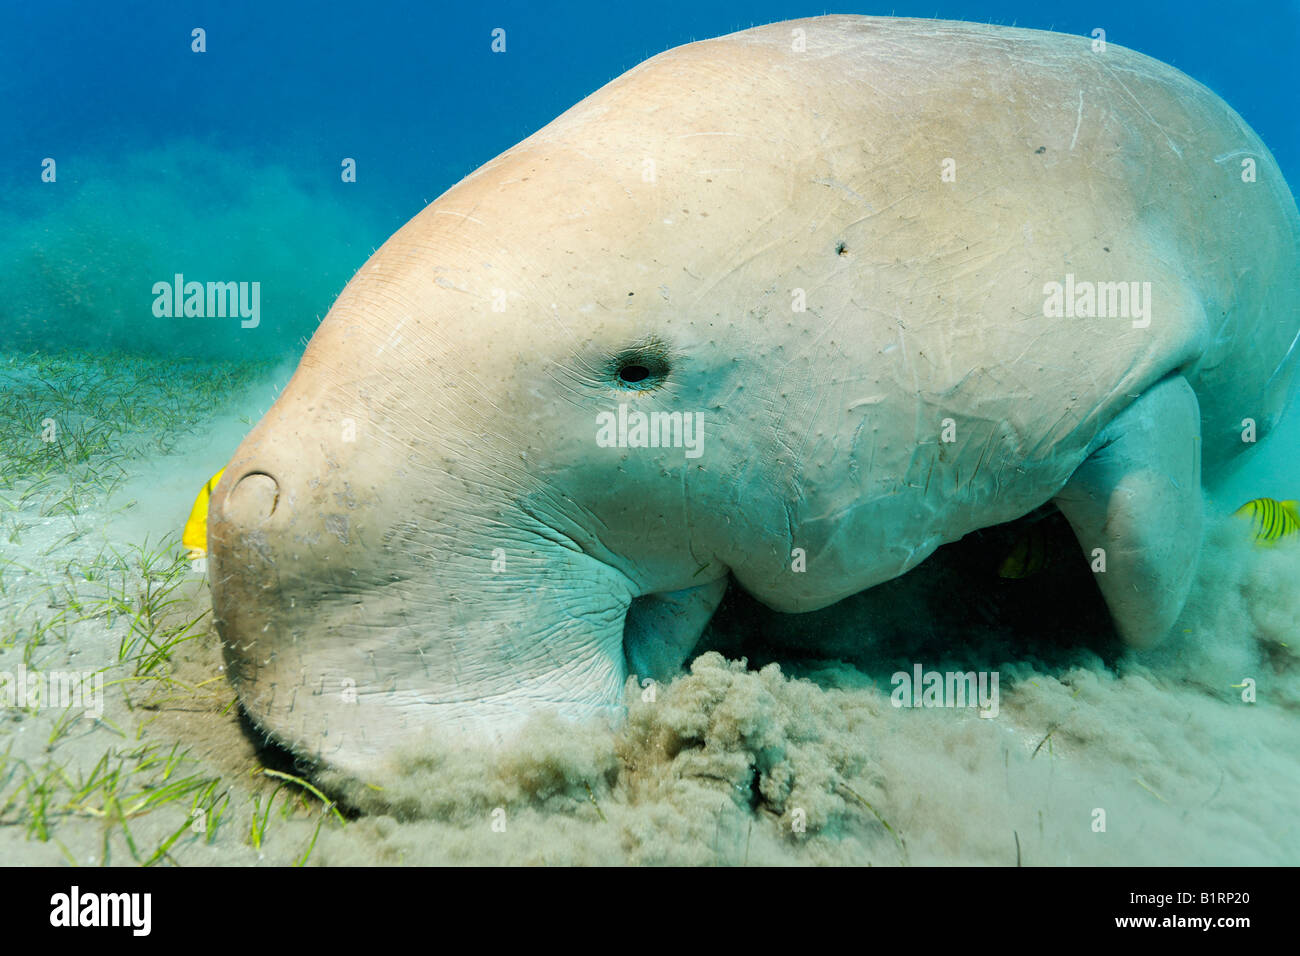 Dugong (Dugong dugon) and two Golden Trevally fish (Gnathanodon speciosus), Shaab Marsa Alam, Red Sea, Egypt, Africa Stock Photo